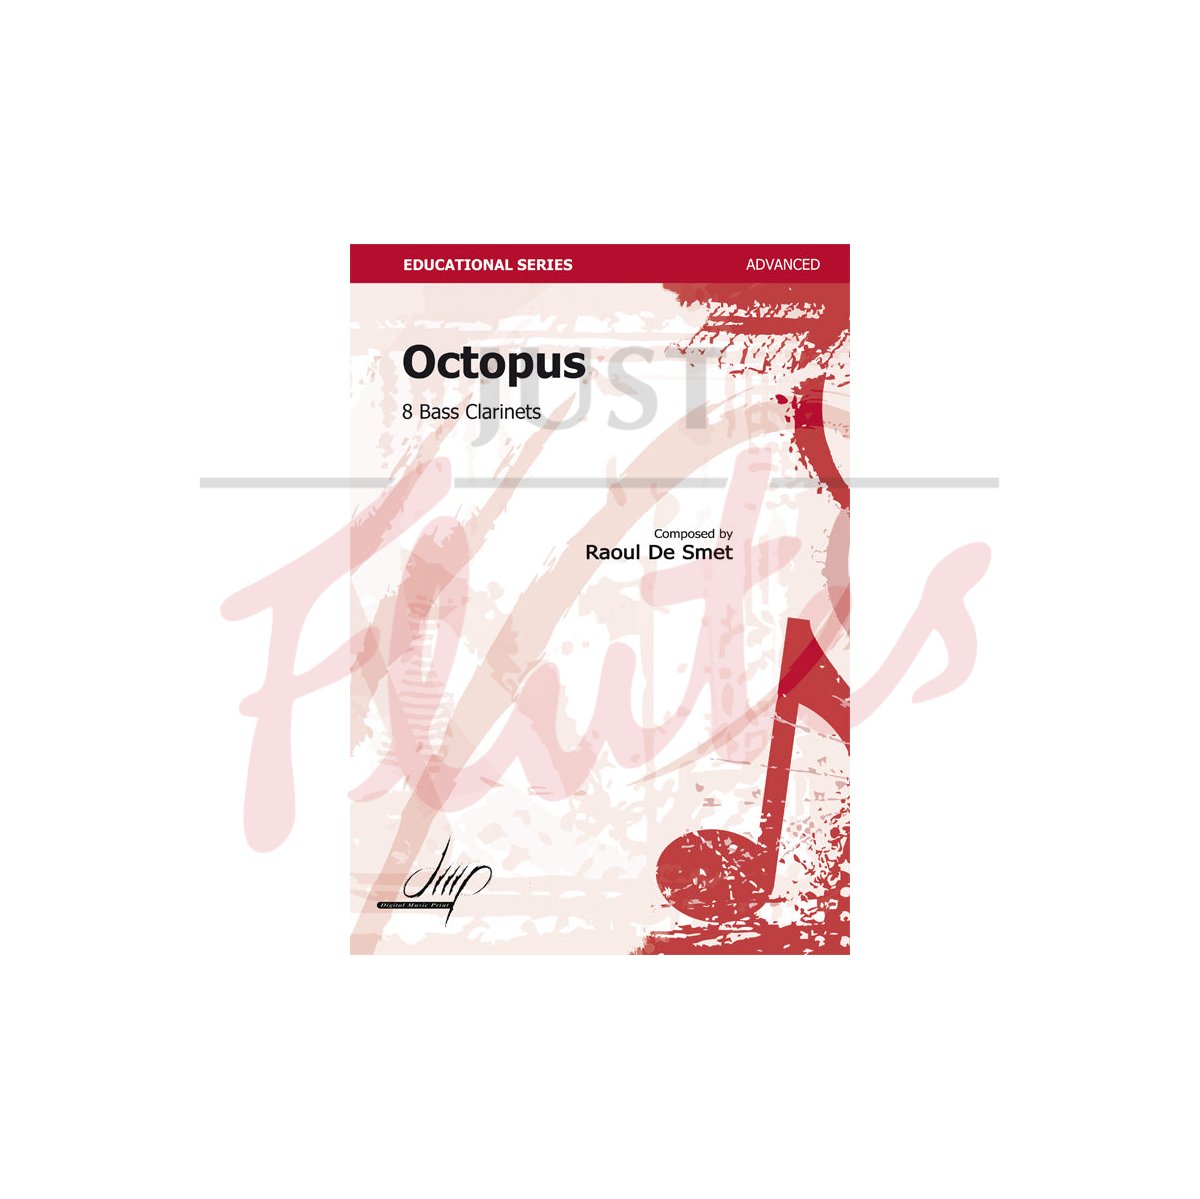 Octopus for Eight Bass Clarinets